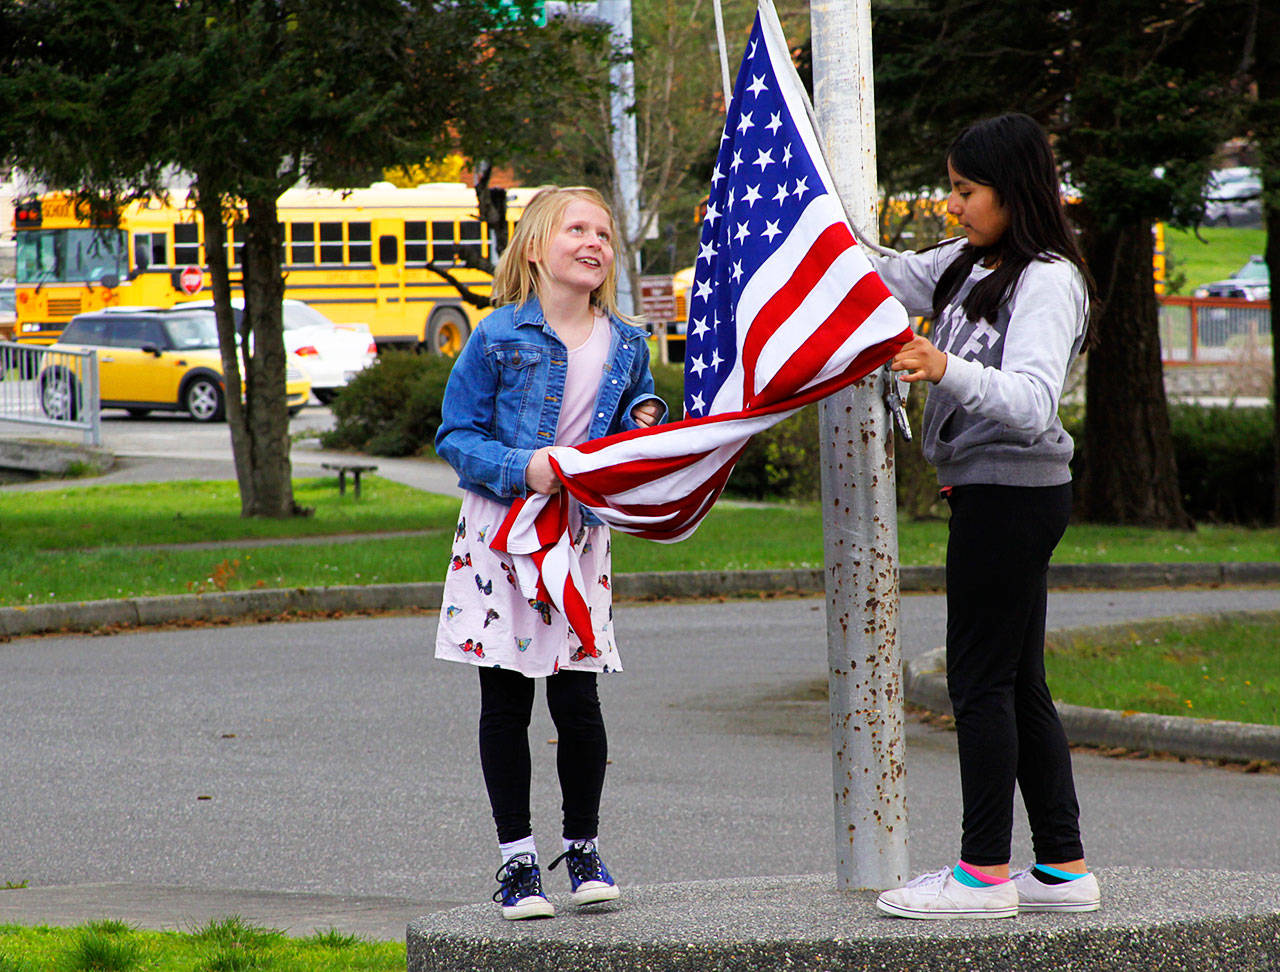 Coupeville Elementary School fifth graders May Crain, left, and Desi Ramirez-Vasquez take down the flag at the end of the school day March 31, 2017. The Coupeville School District is exploring options as it looks at long-range planning for the aging elementary school. One option is to build a new school away from the busy highway. Photo by Ron Newberry/Whidbey News-Times